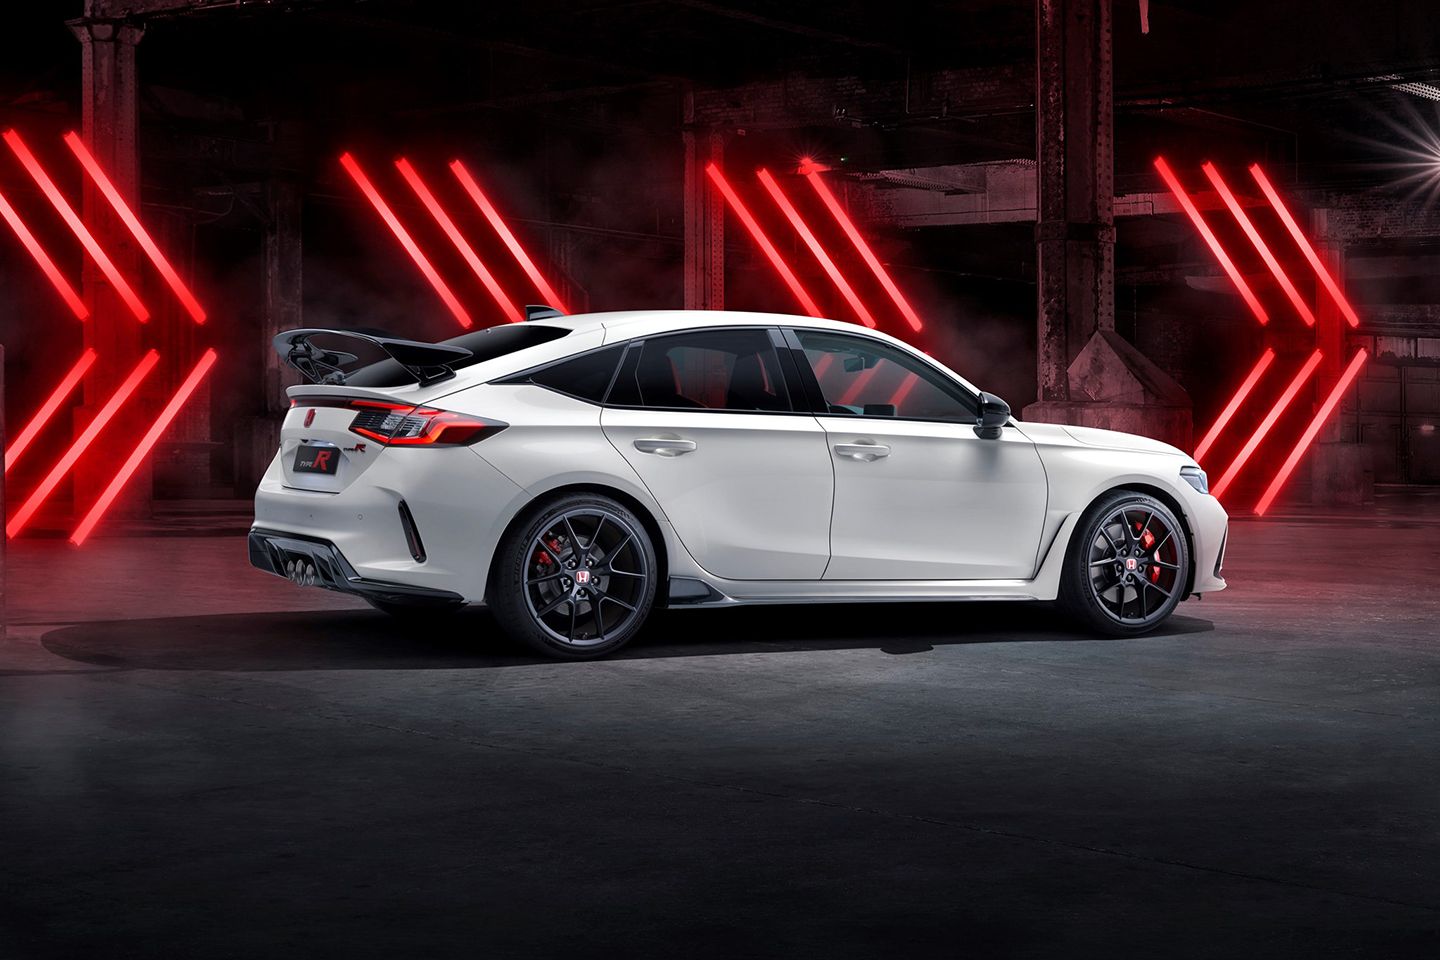 2023 Honda Civic Type R officially unveiled